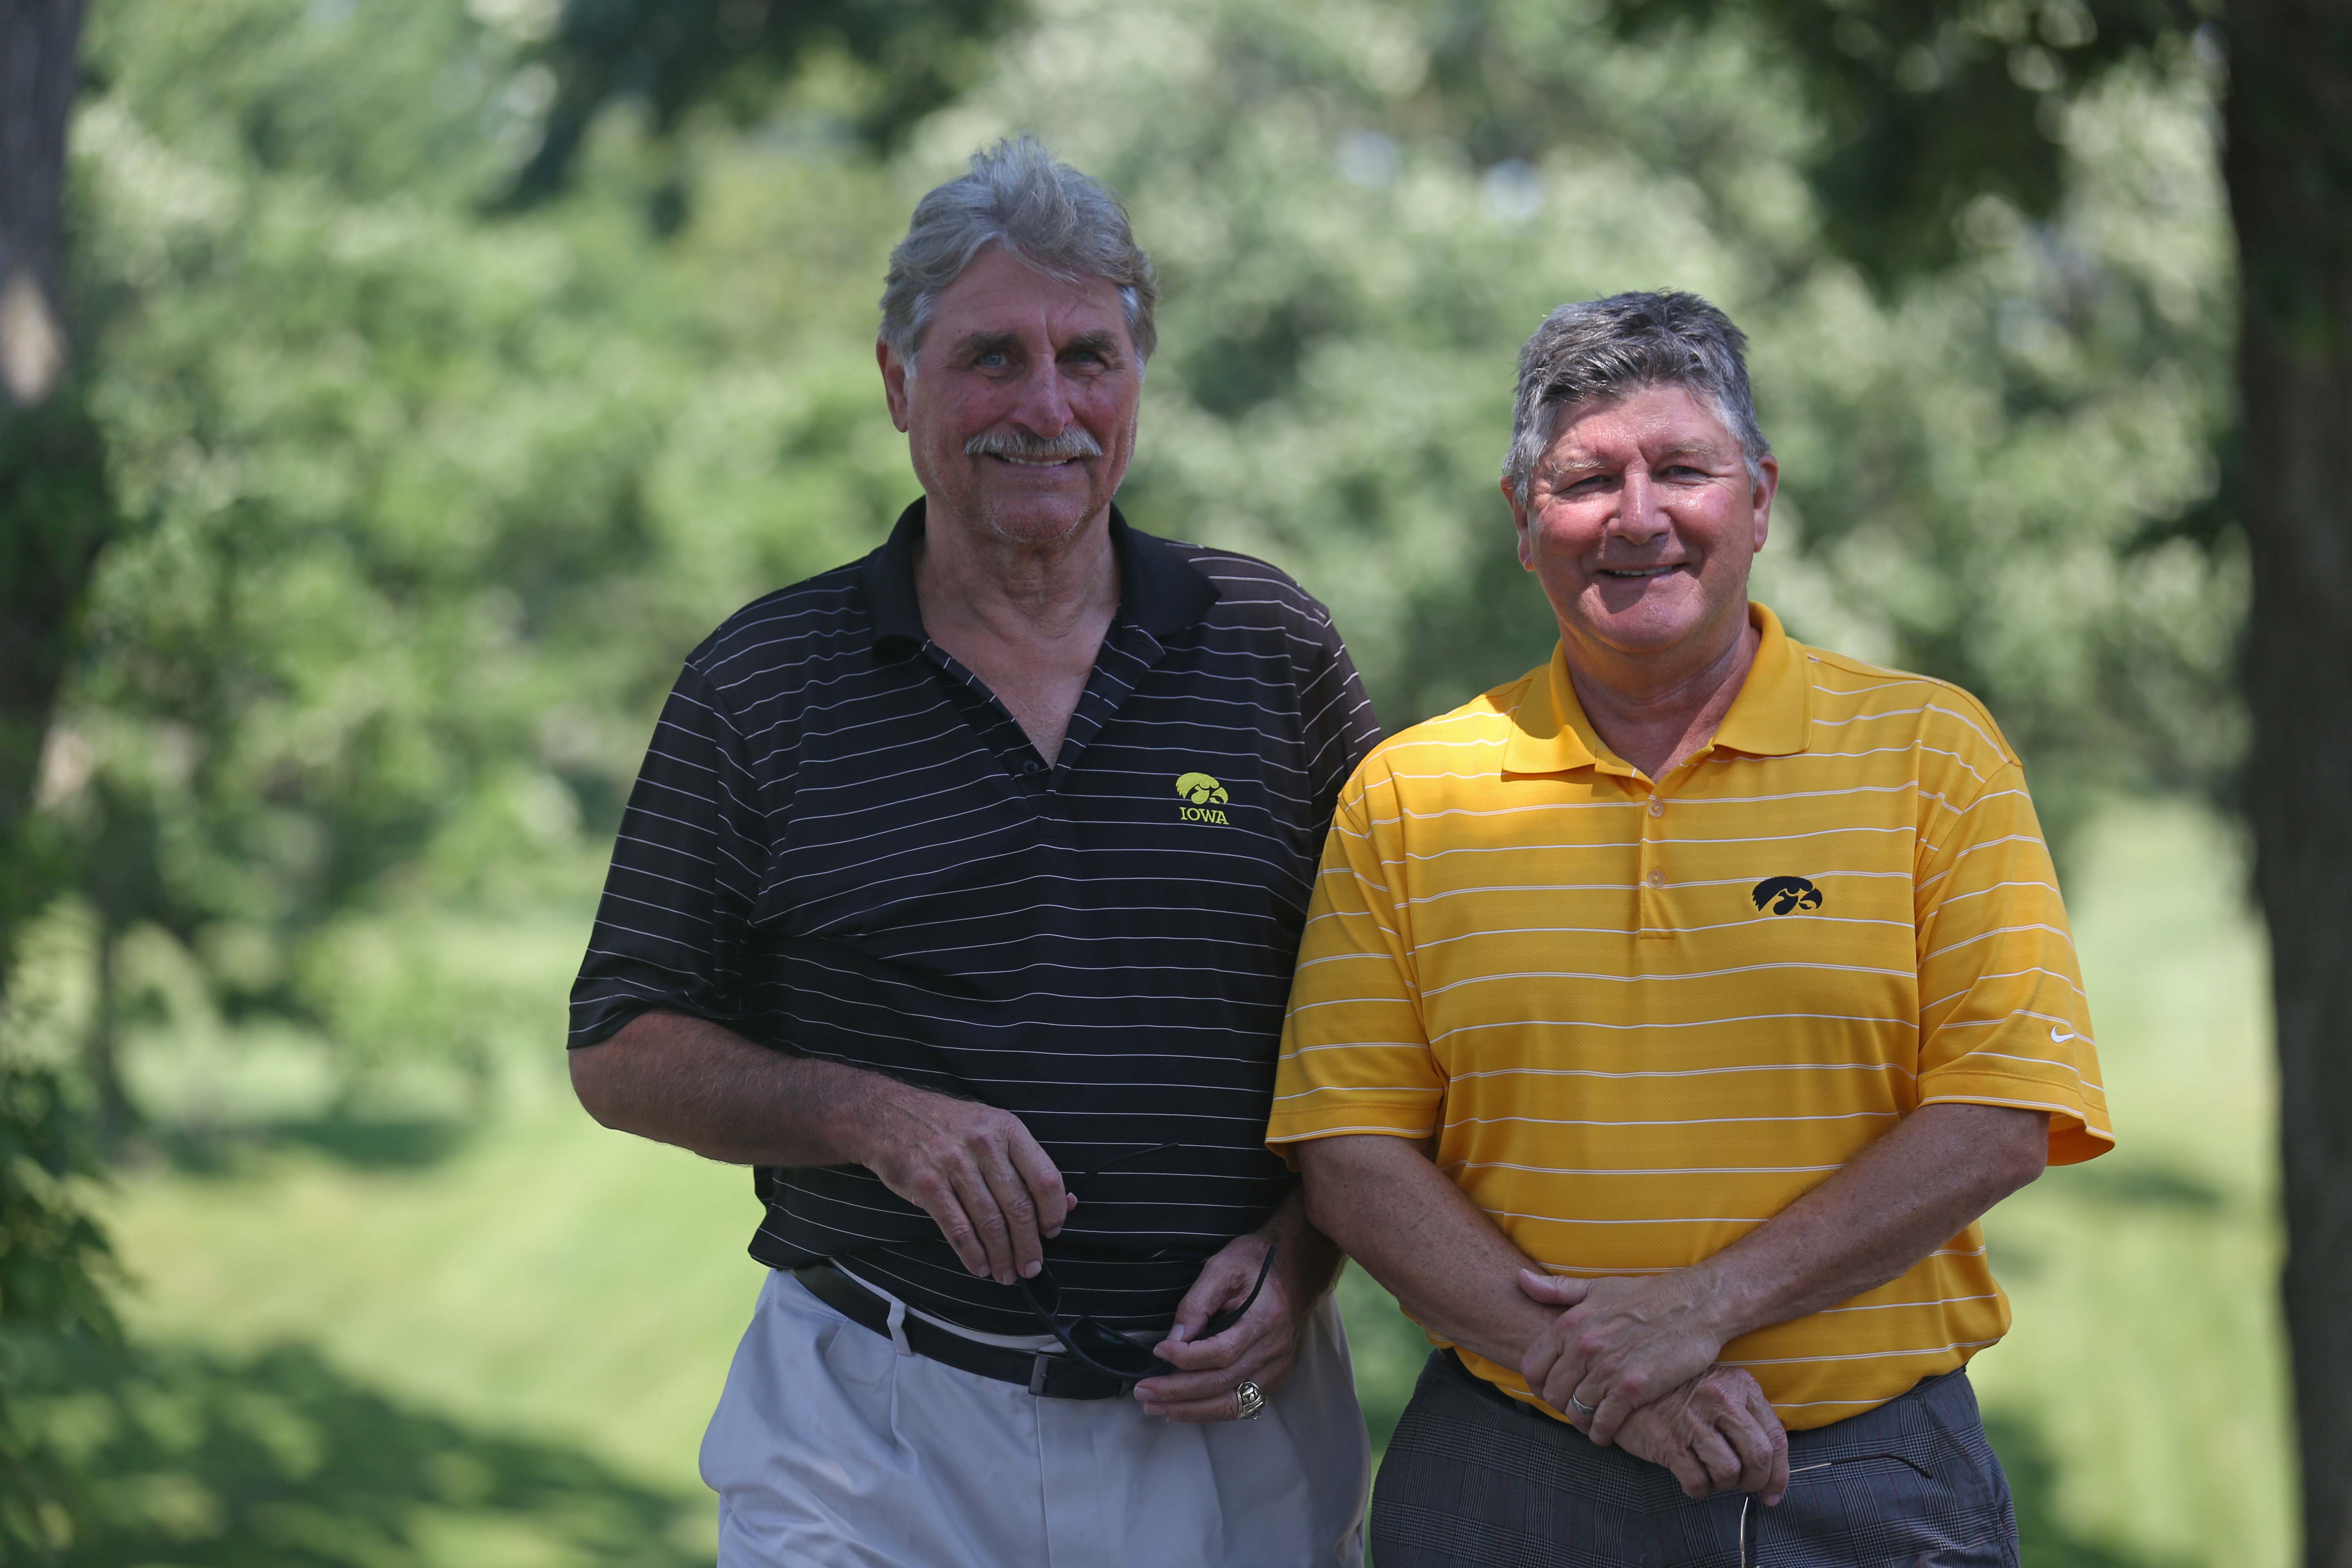 Gary Dolphin and Ed Podolak, radio announcers for the University of Iowa football team pose for a photo during the annual Polk County I-Club golf fundraiser at Wakonda Club in Des Moines on Monday, June 13, 2015.